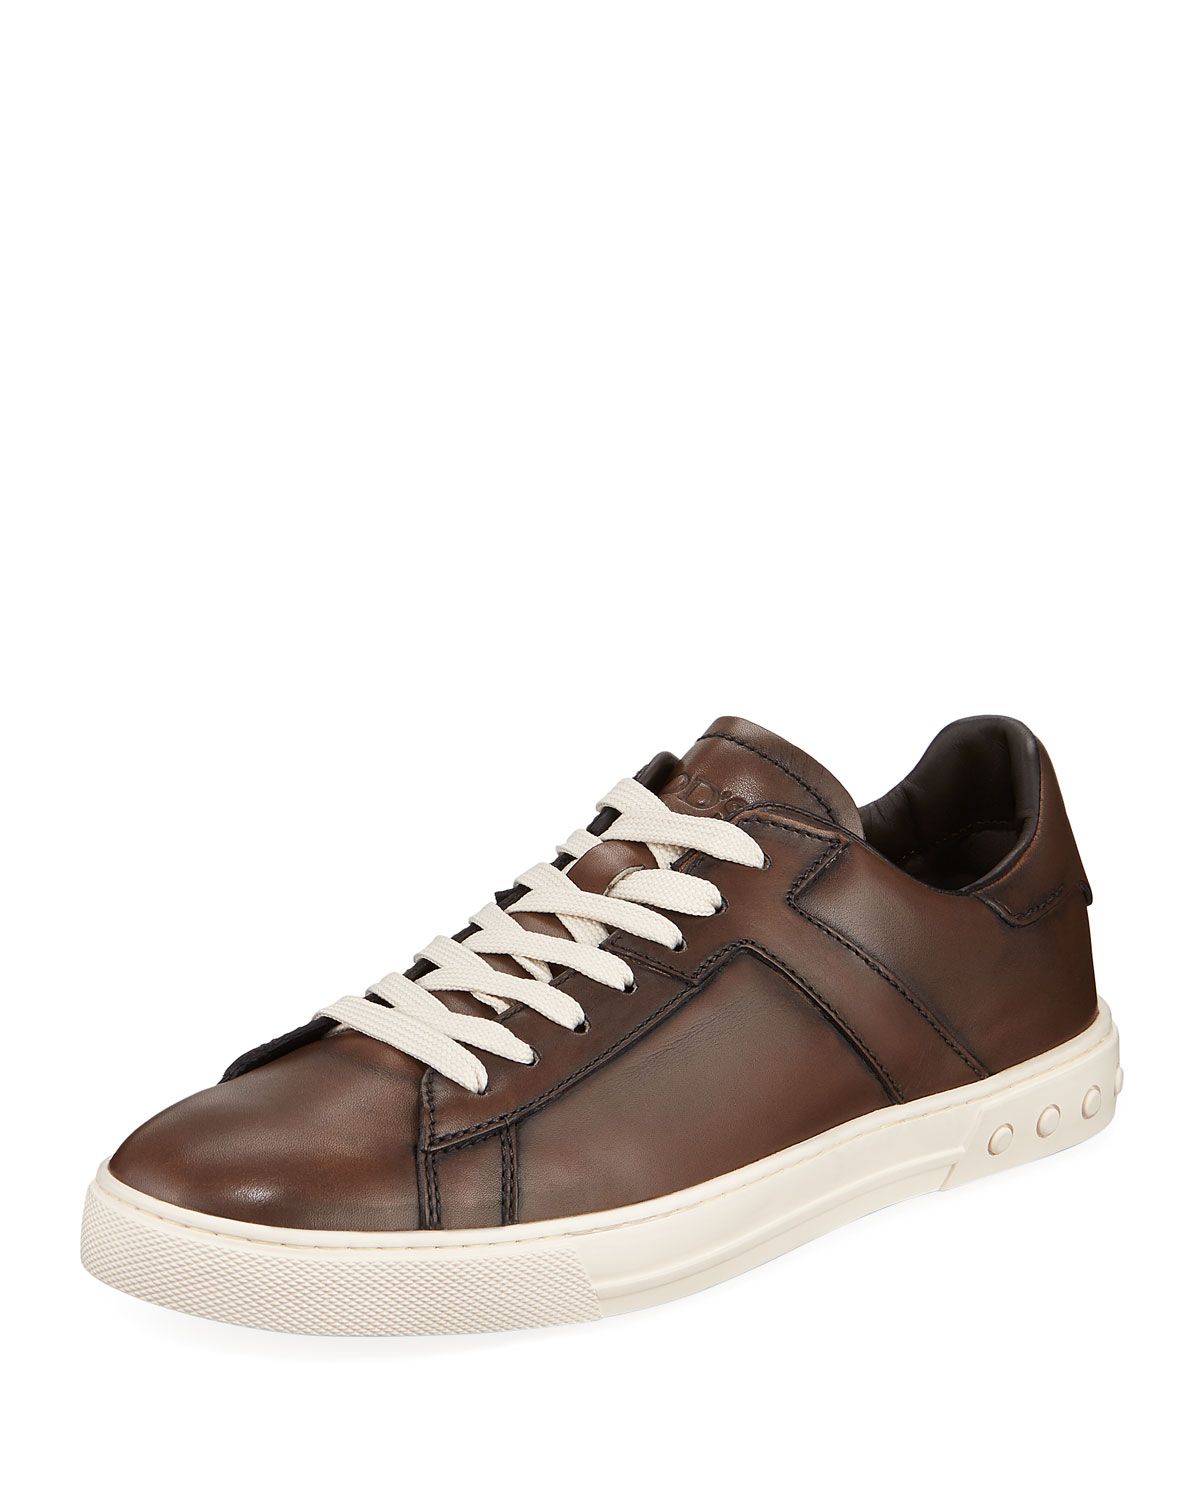 Men's Sportivo Burnished Leather Sneakers | Neiman Marcus